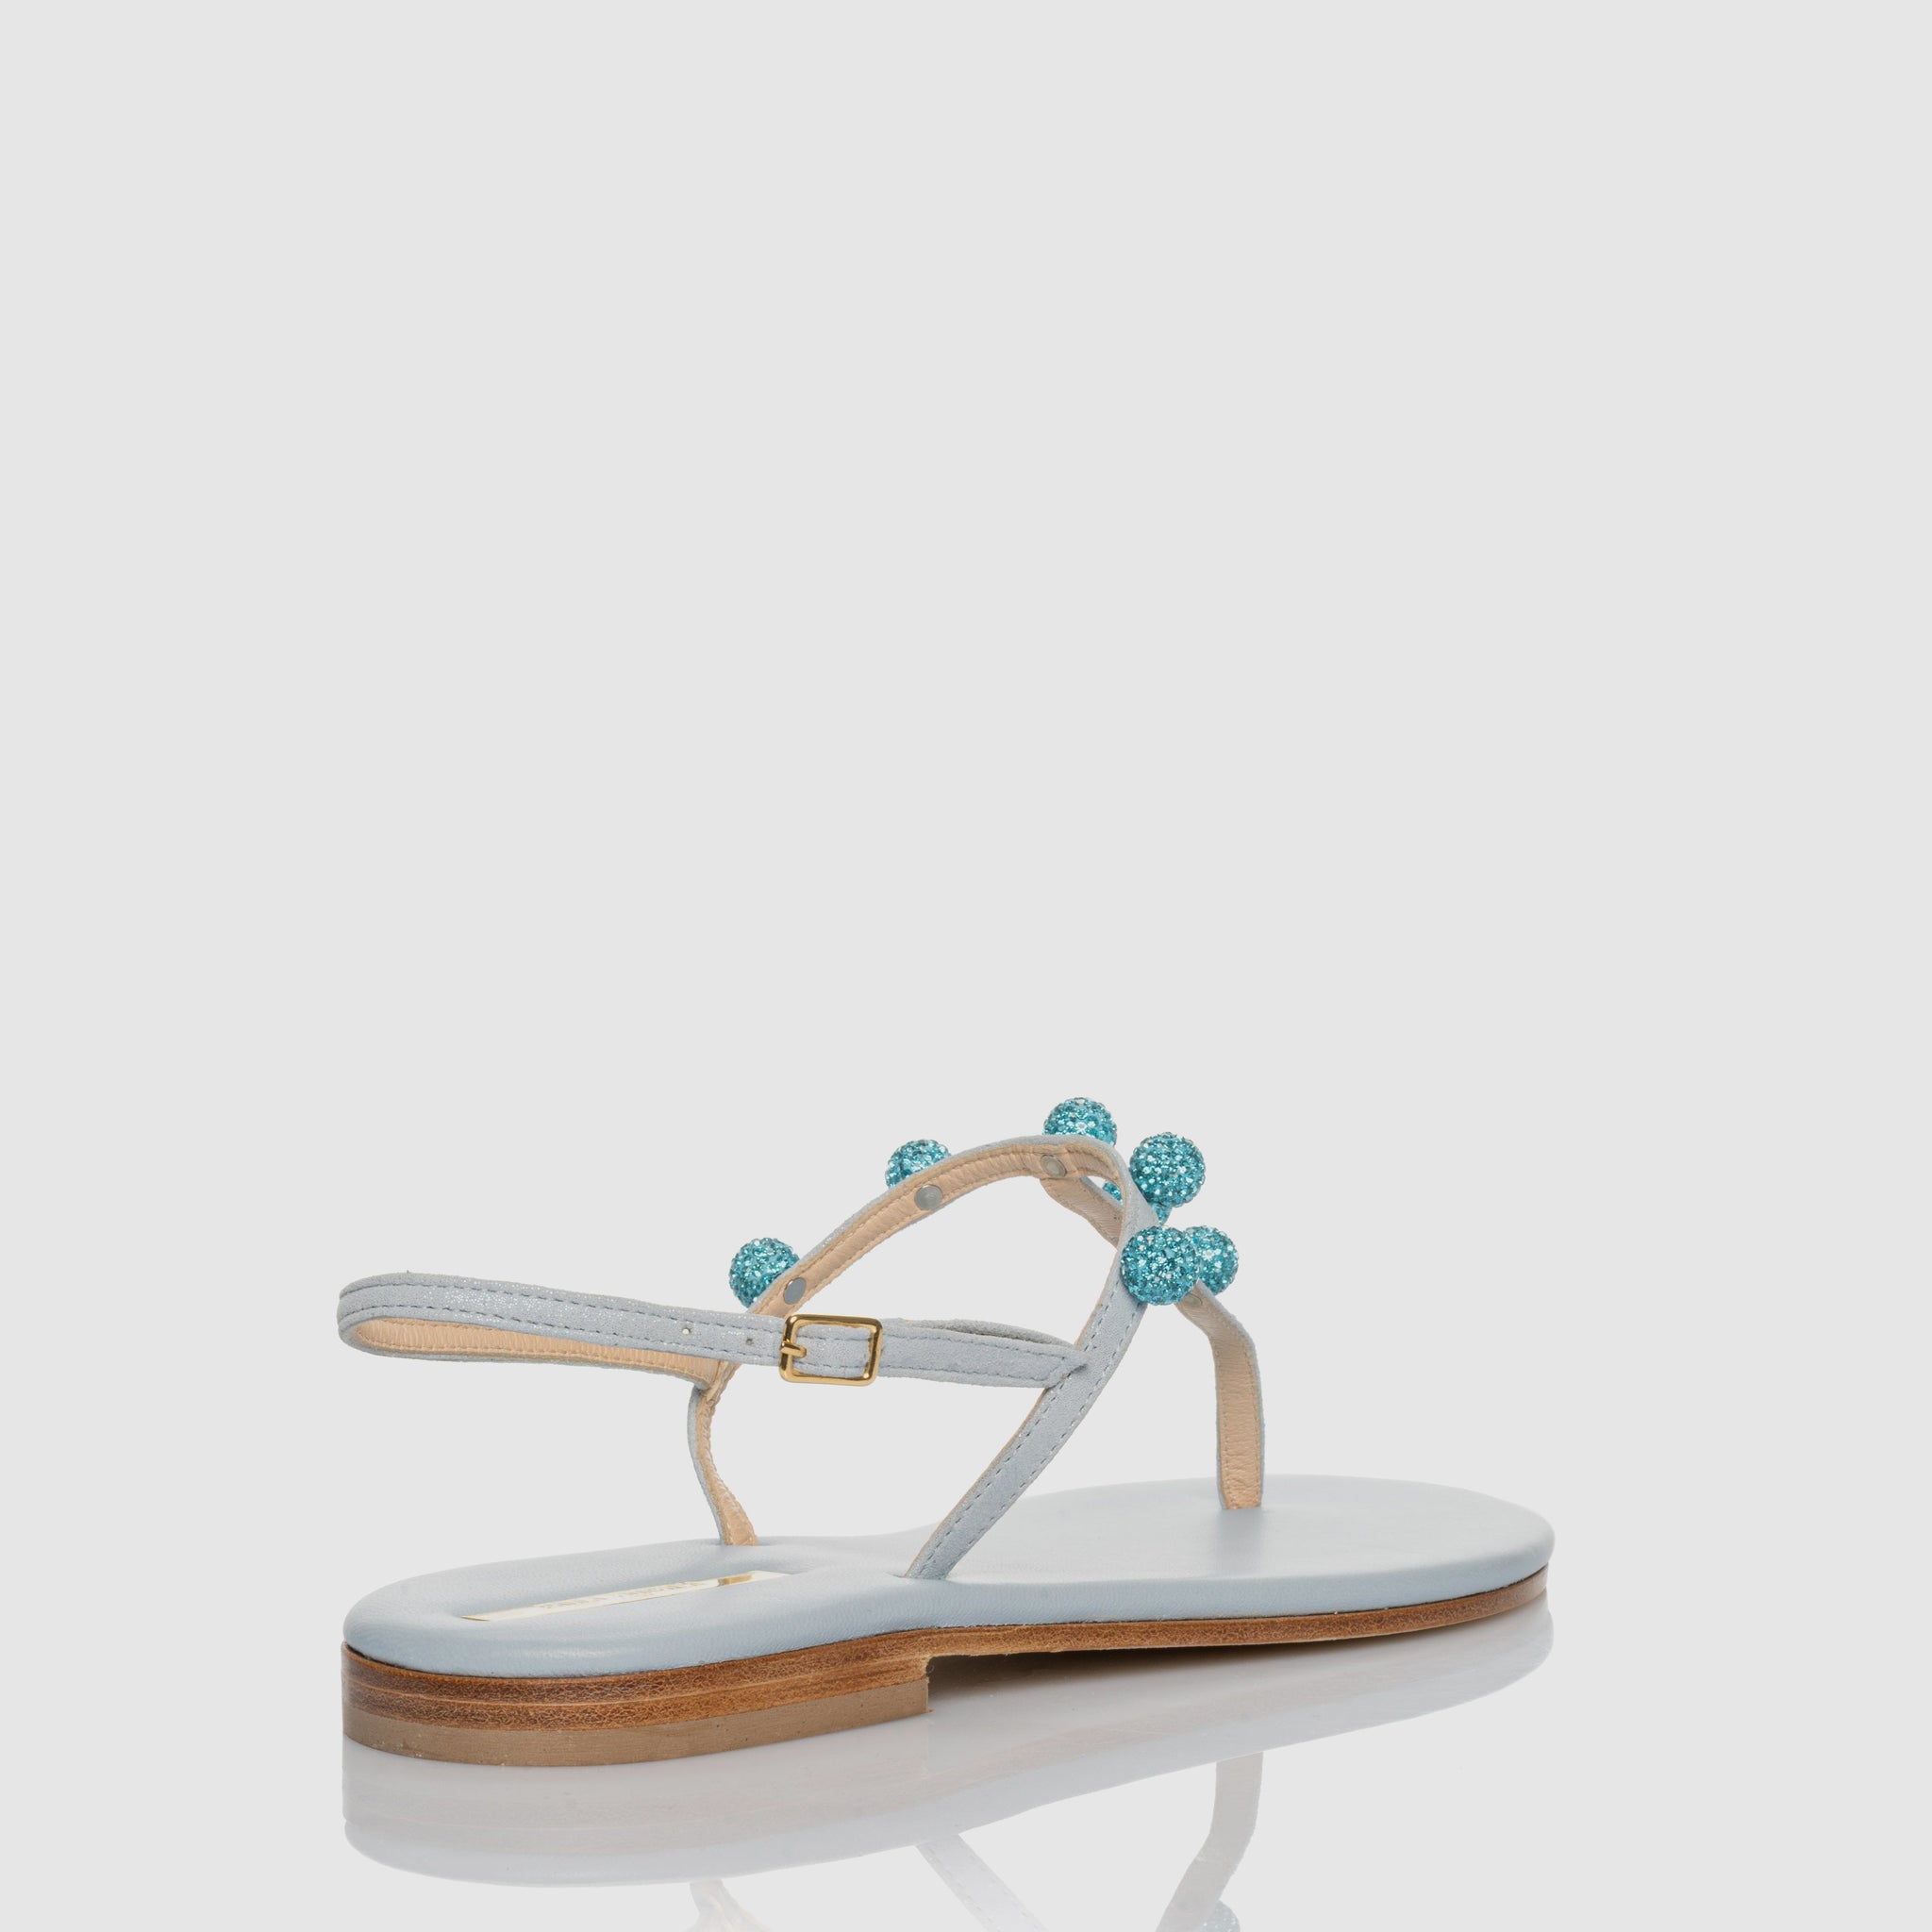 Atmosphere Blue thong sandal in glitter suede